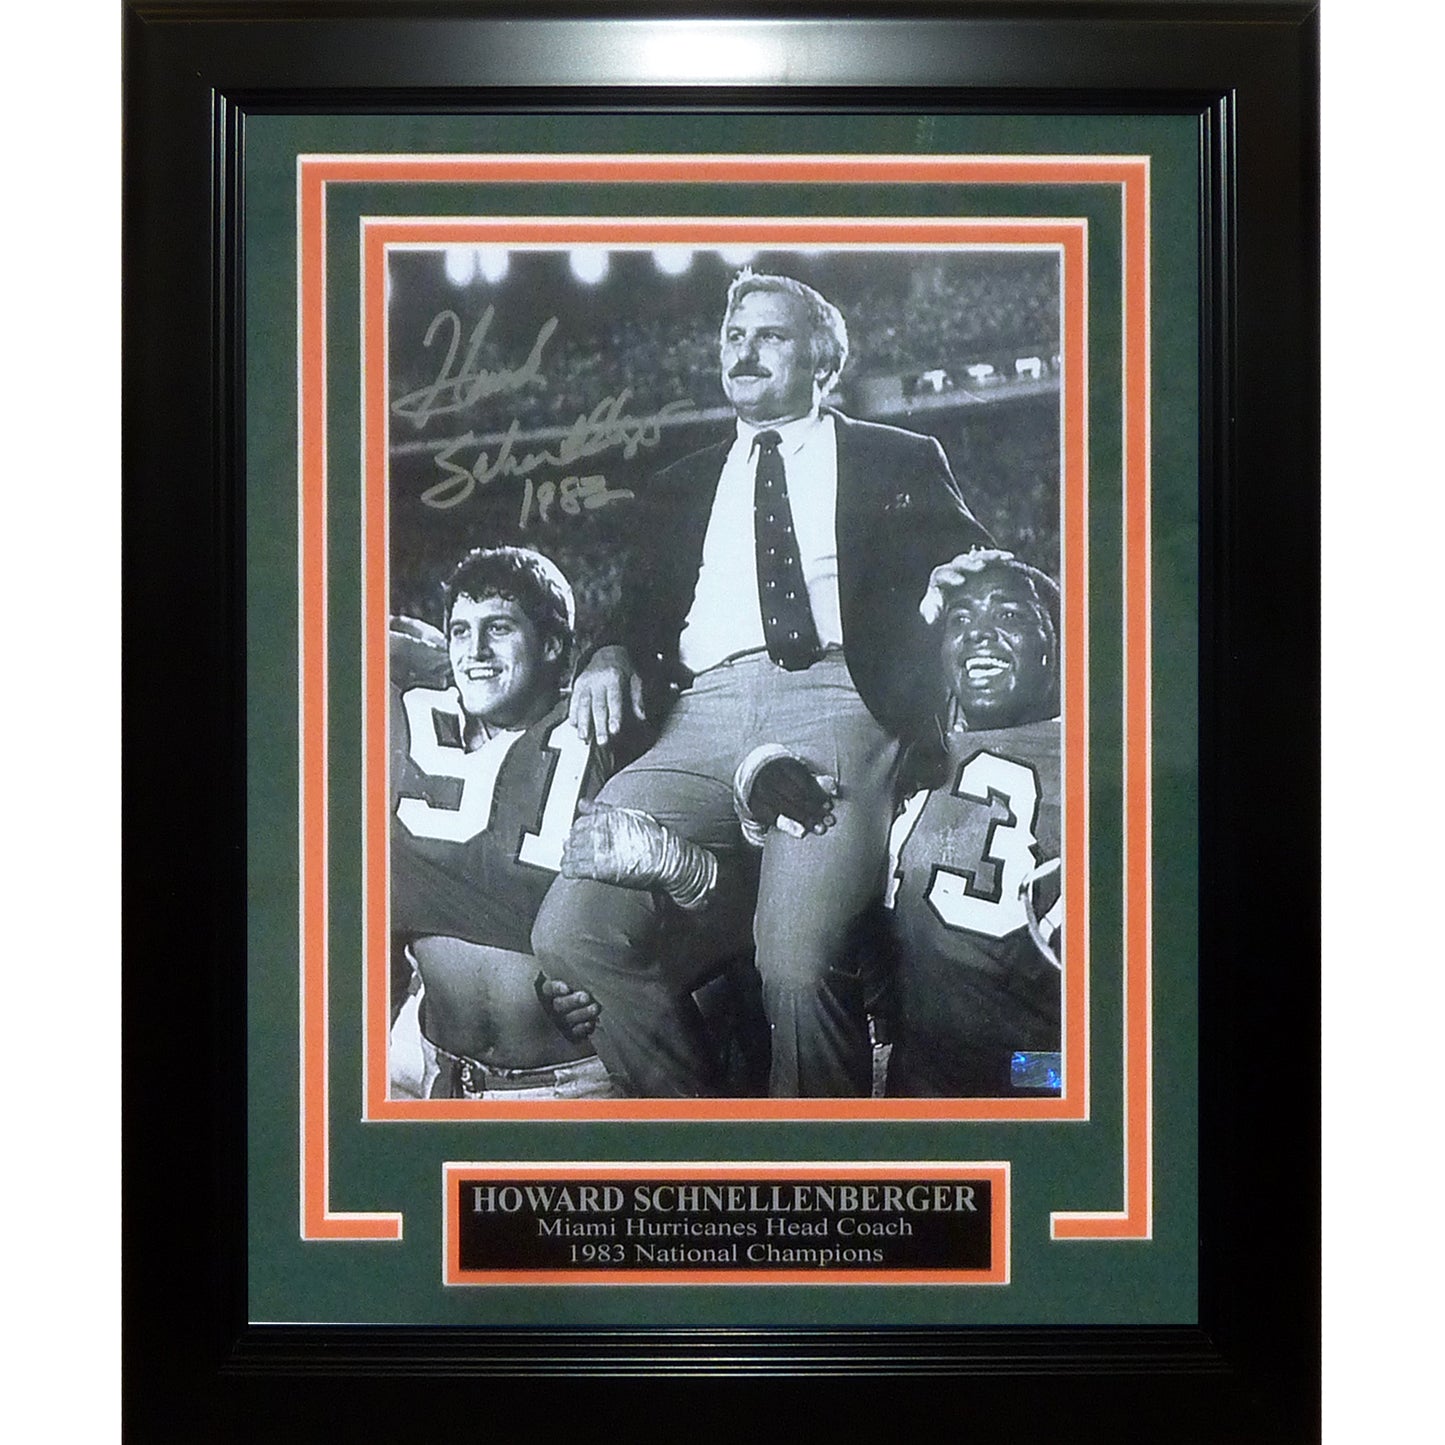 Howard Schnellenberger Autographed Miami Hurricanes (BW on Shoulders) Framed 8x10 Photo w/ "1983"